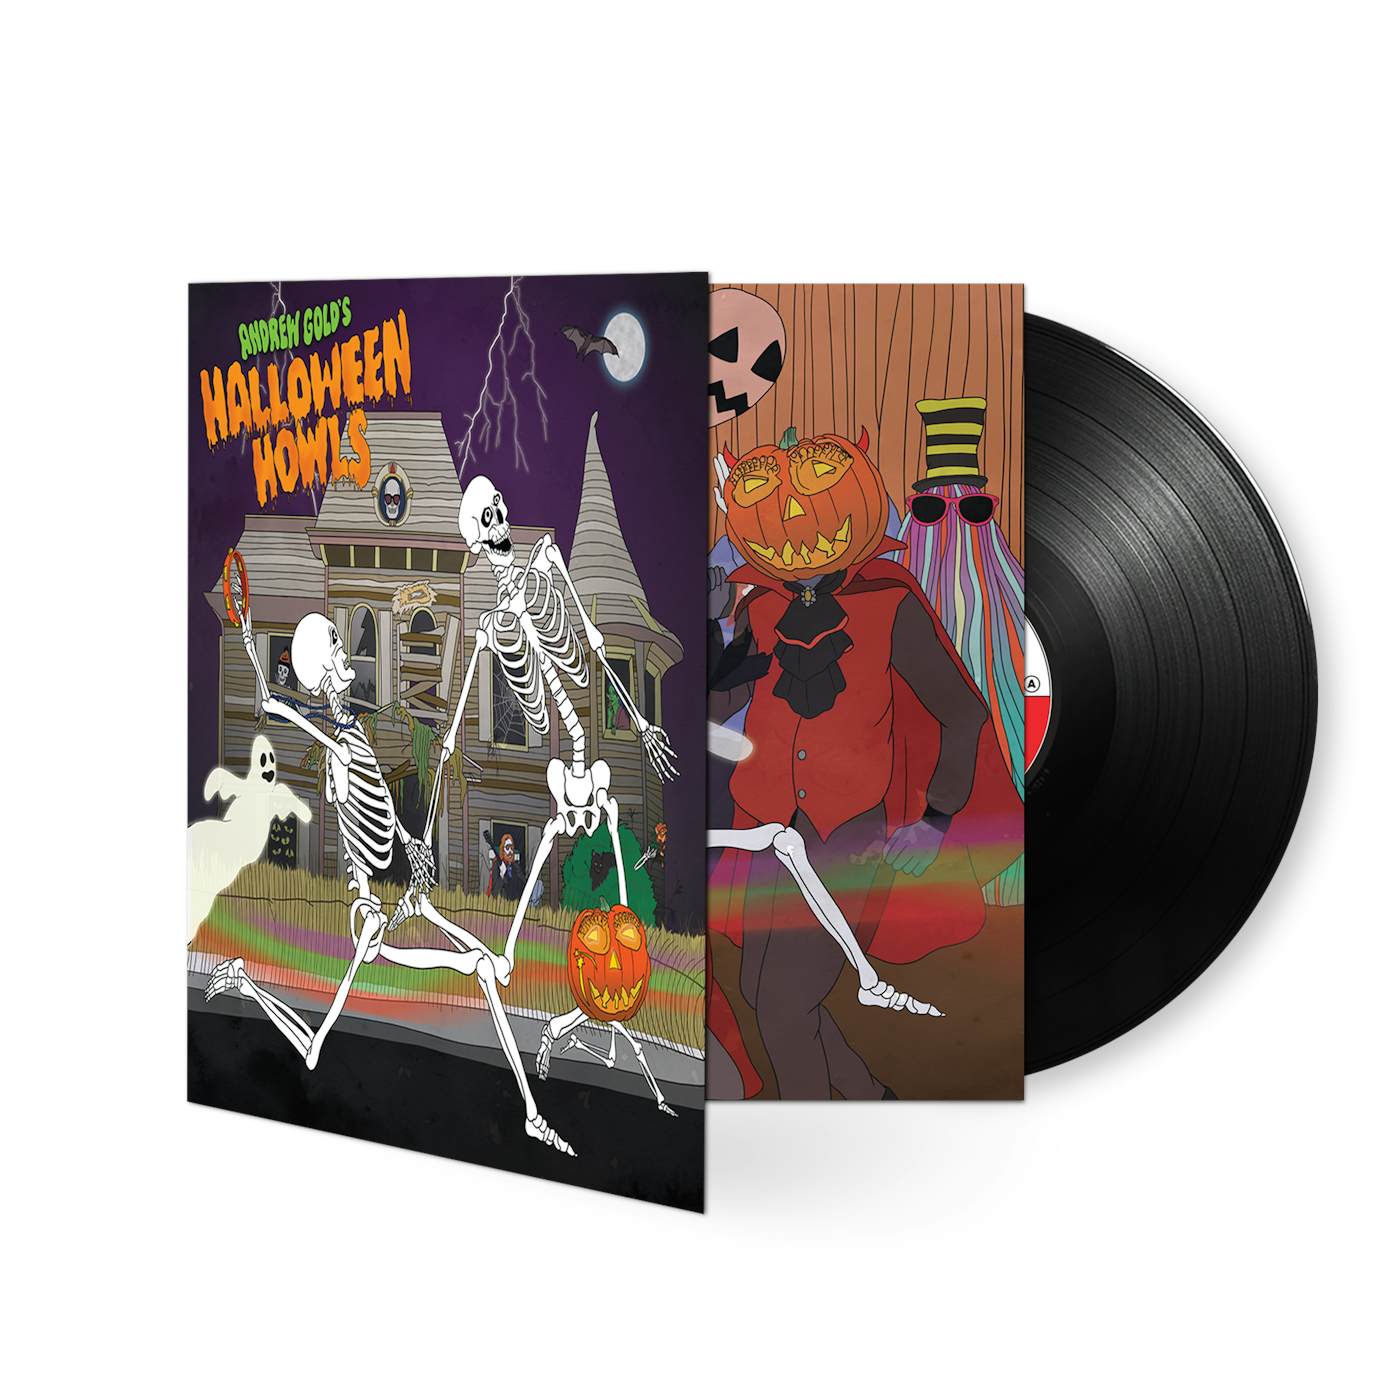 Andrew Gold Halloween Howls: Fun & Scary Music (LP - Signed by Jess Rotter) (Vinyl)